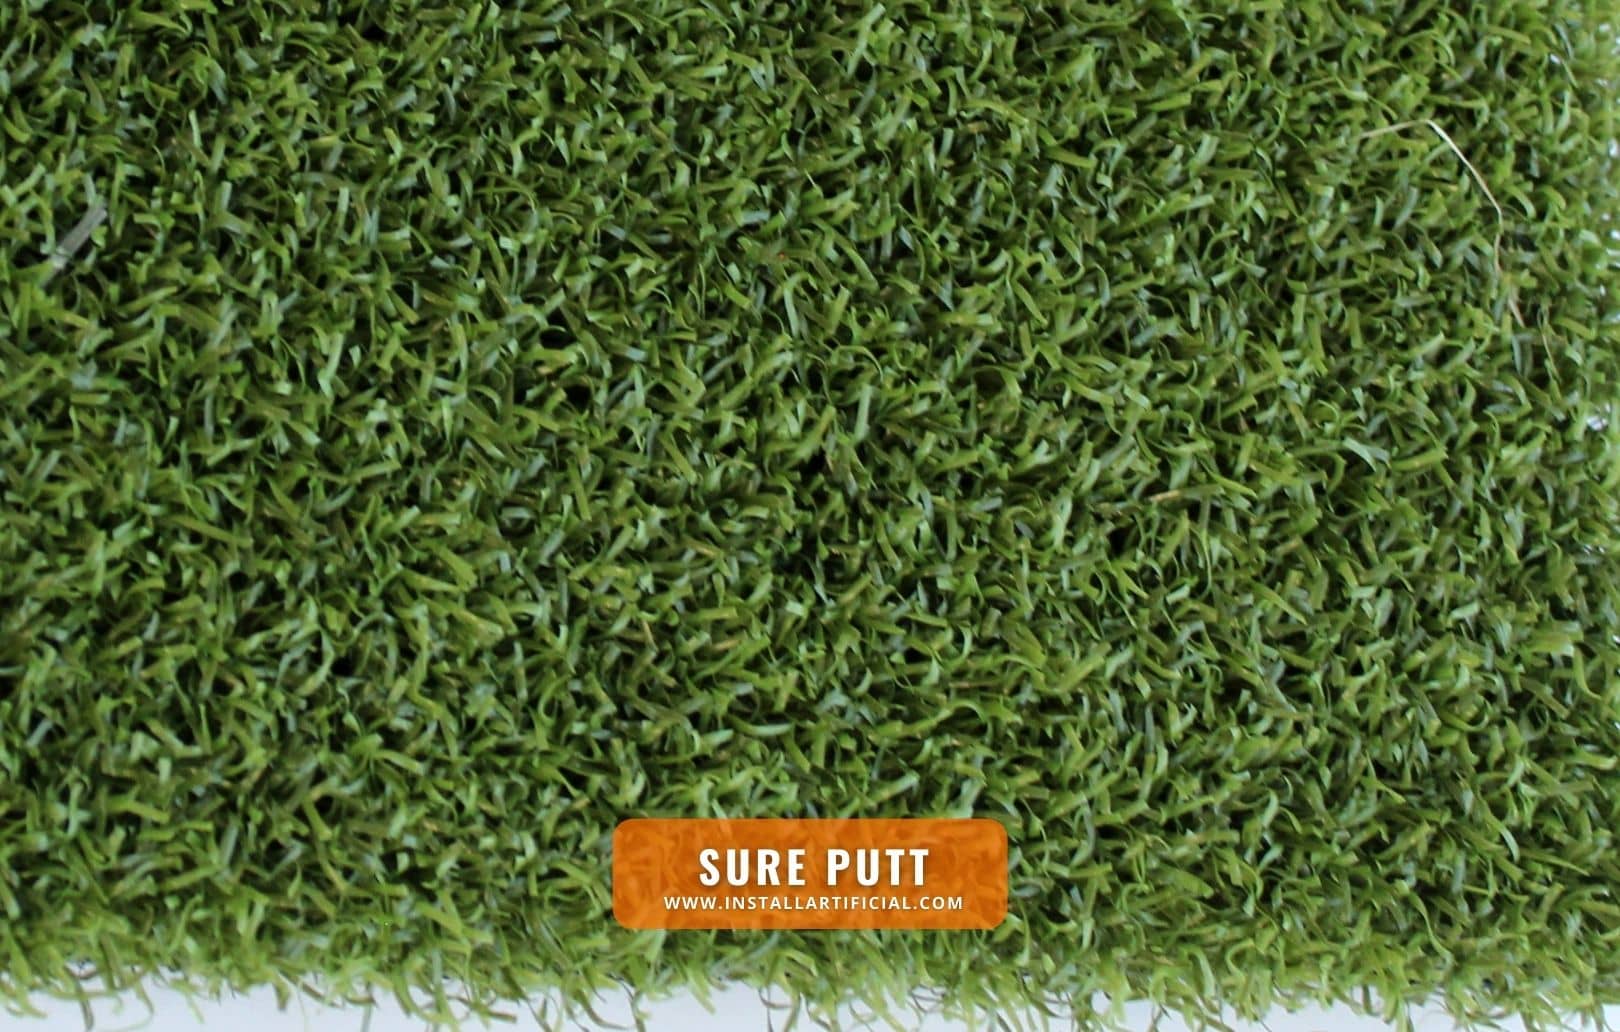 Sure Putt, Synthetic Grass Warehouse, Tiger Turf, top